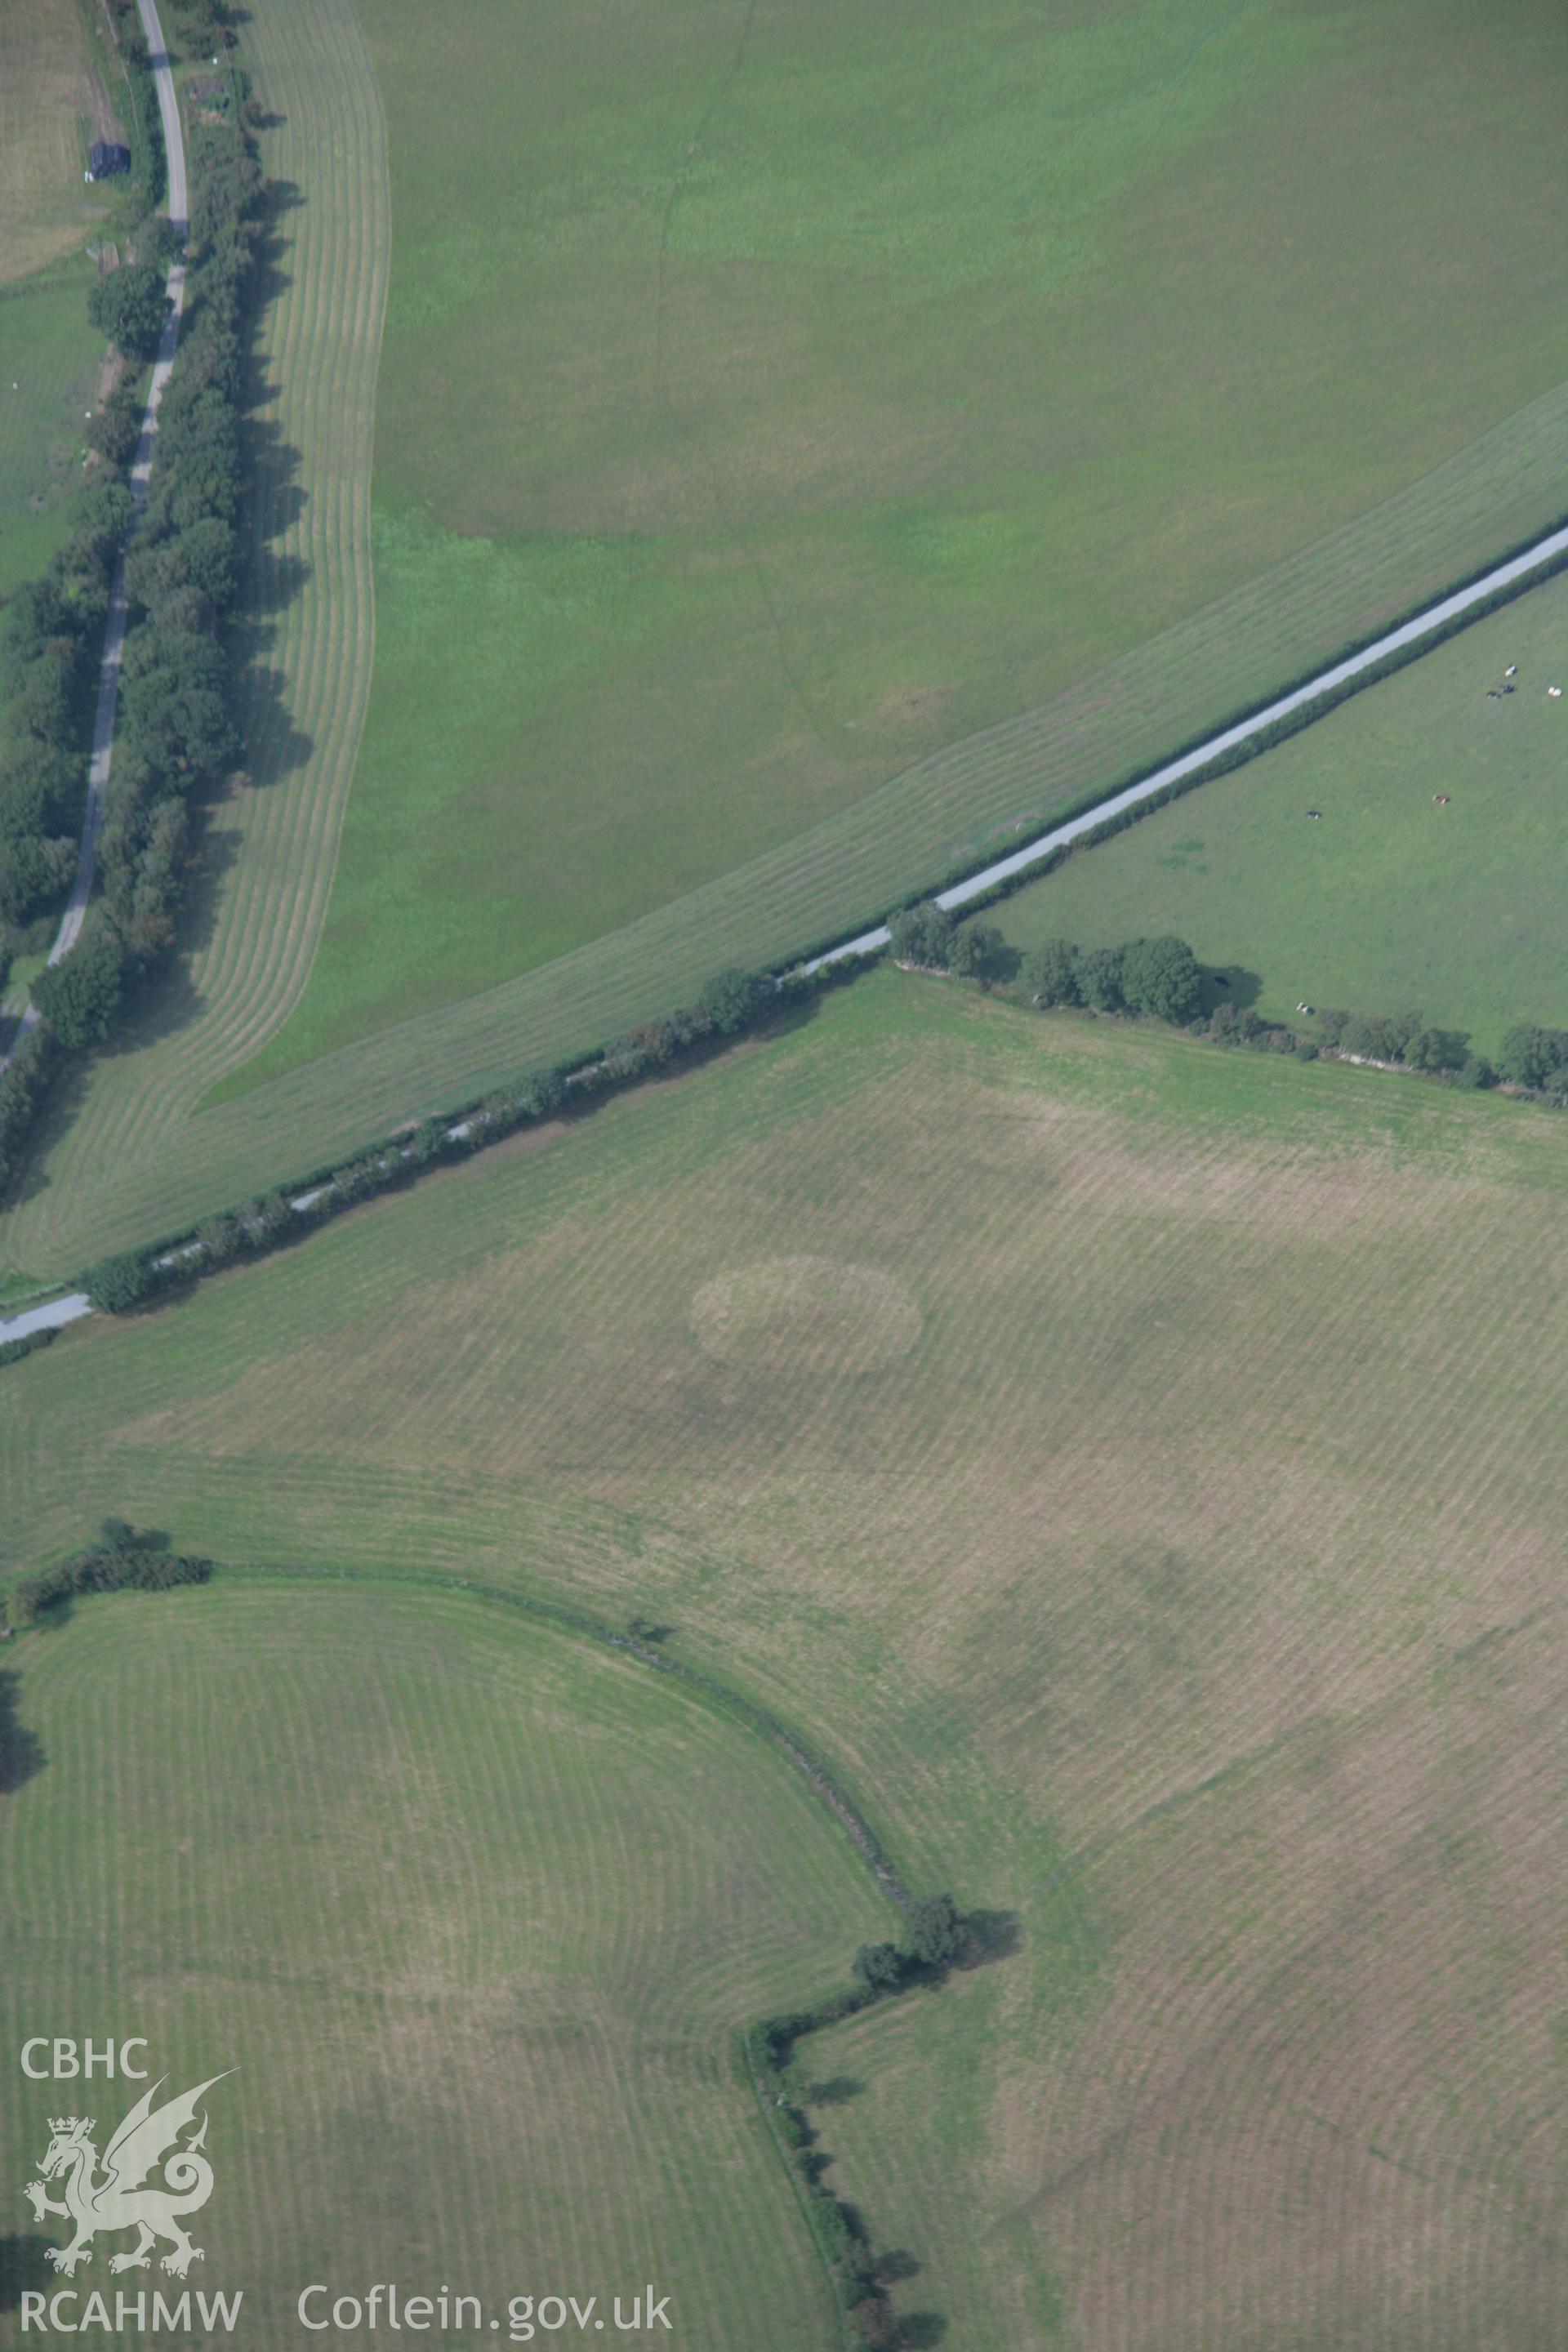 RCAHMW colour oblique aerial photograph of Rhos y Domen Round Barrows. Taken on 14 August 2006 by Toby Driver.